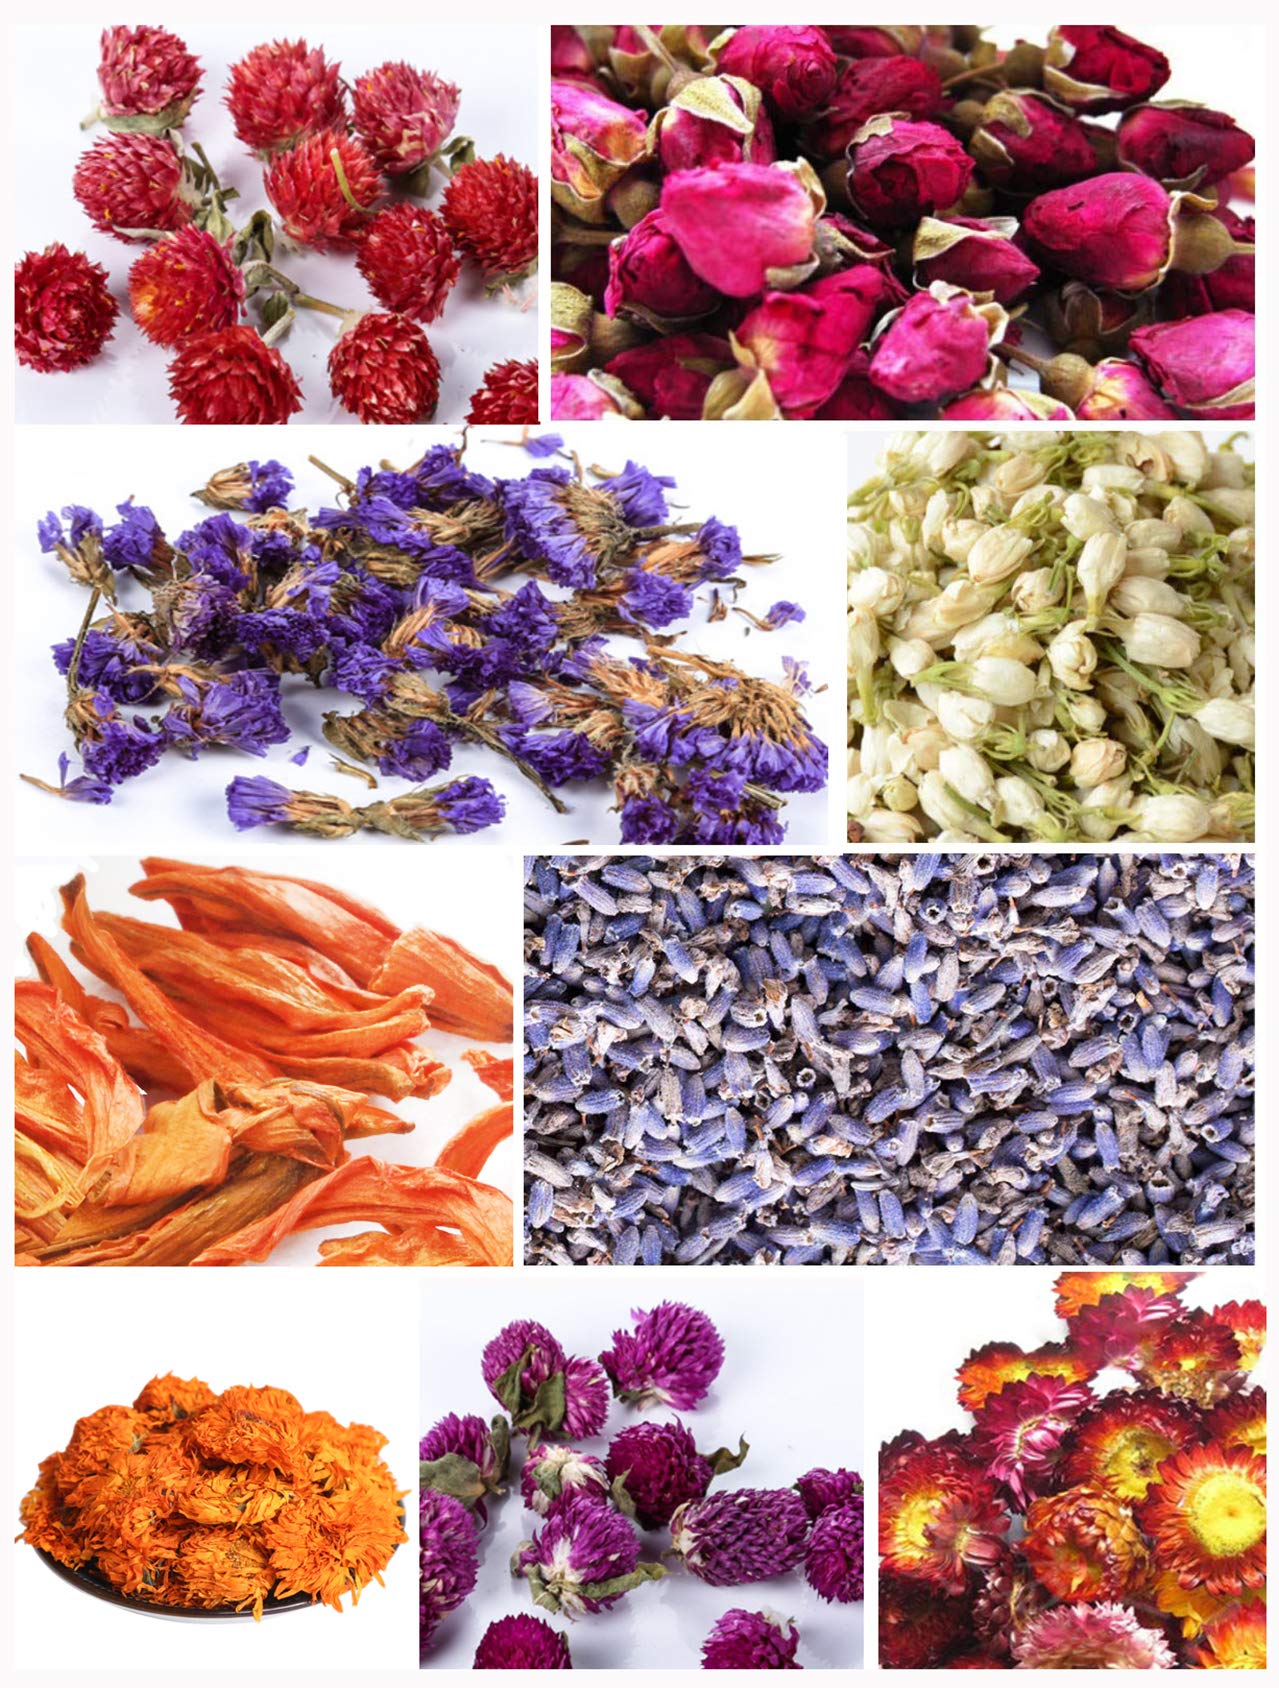 Edible Flowers for Drinks and Food Bulk Edible Dried Flowers for Soap Making